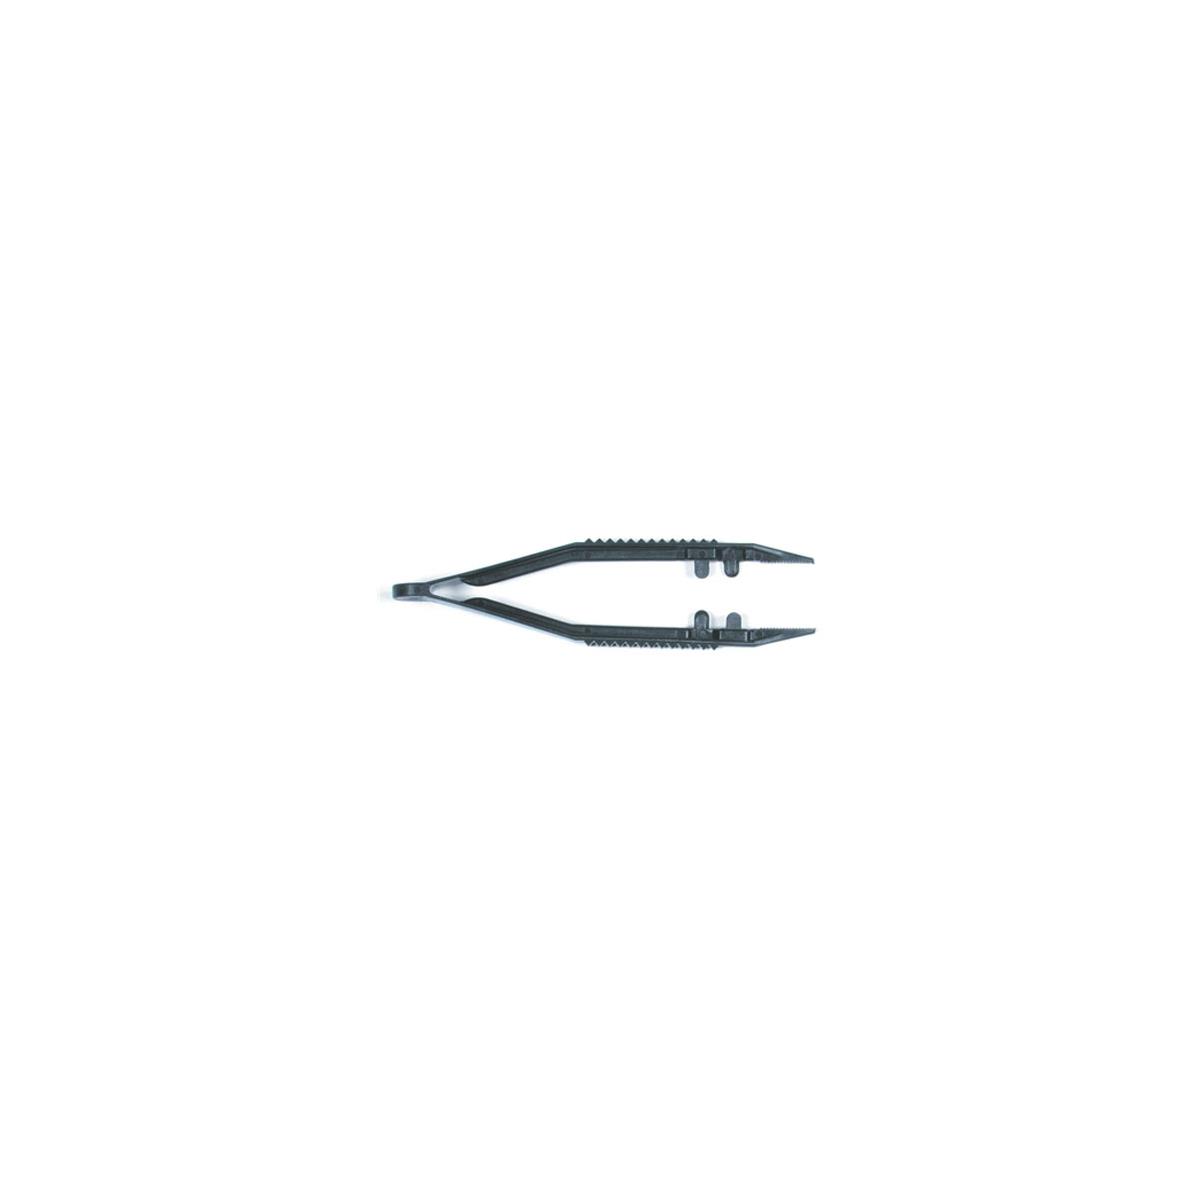 Image of Sirchie Evidence Collection Tweezers